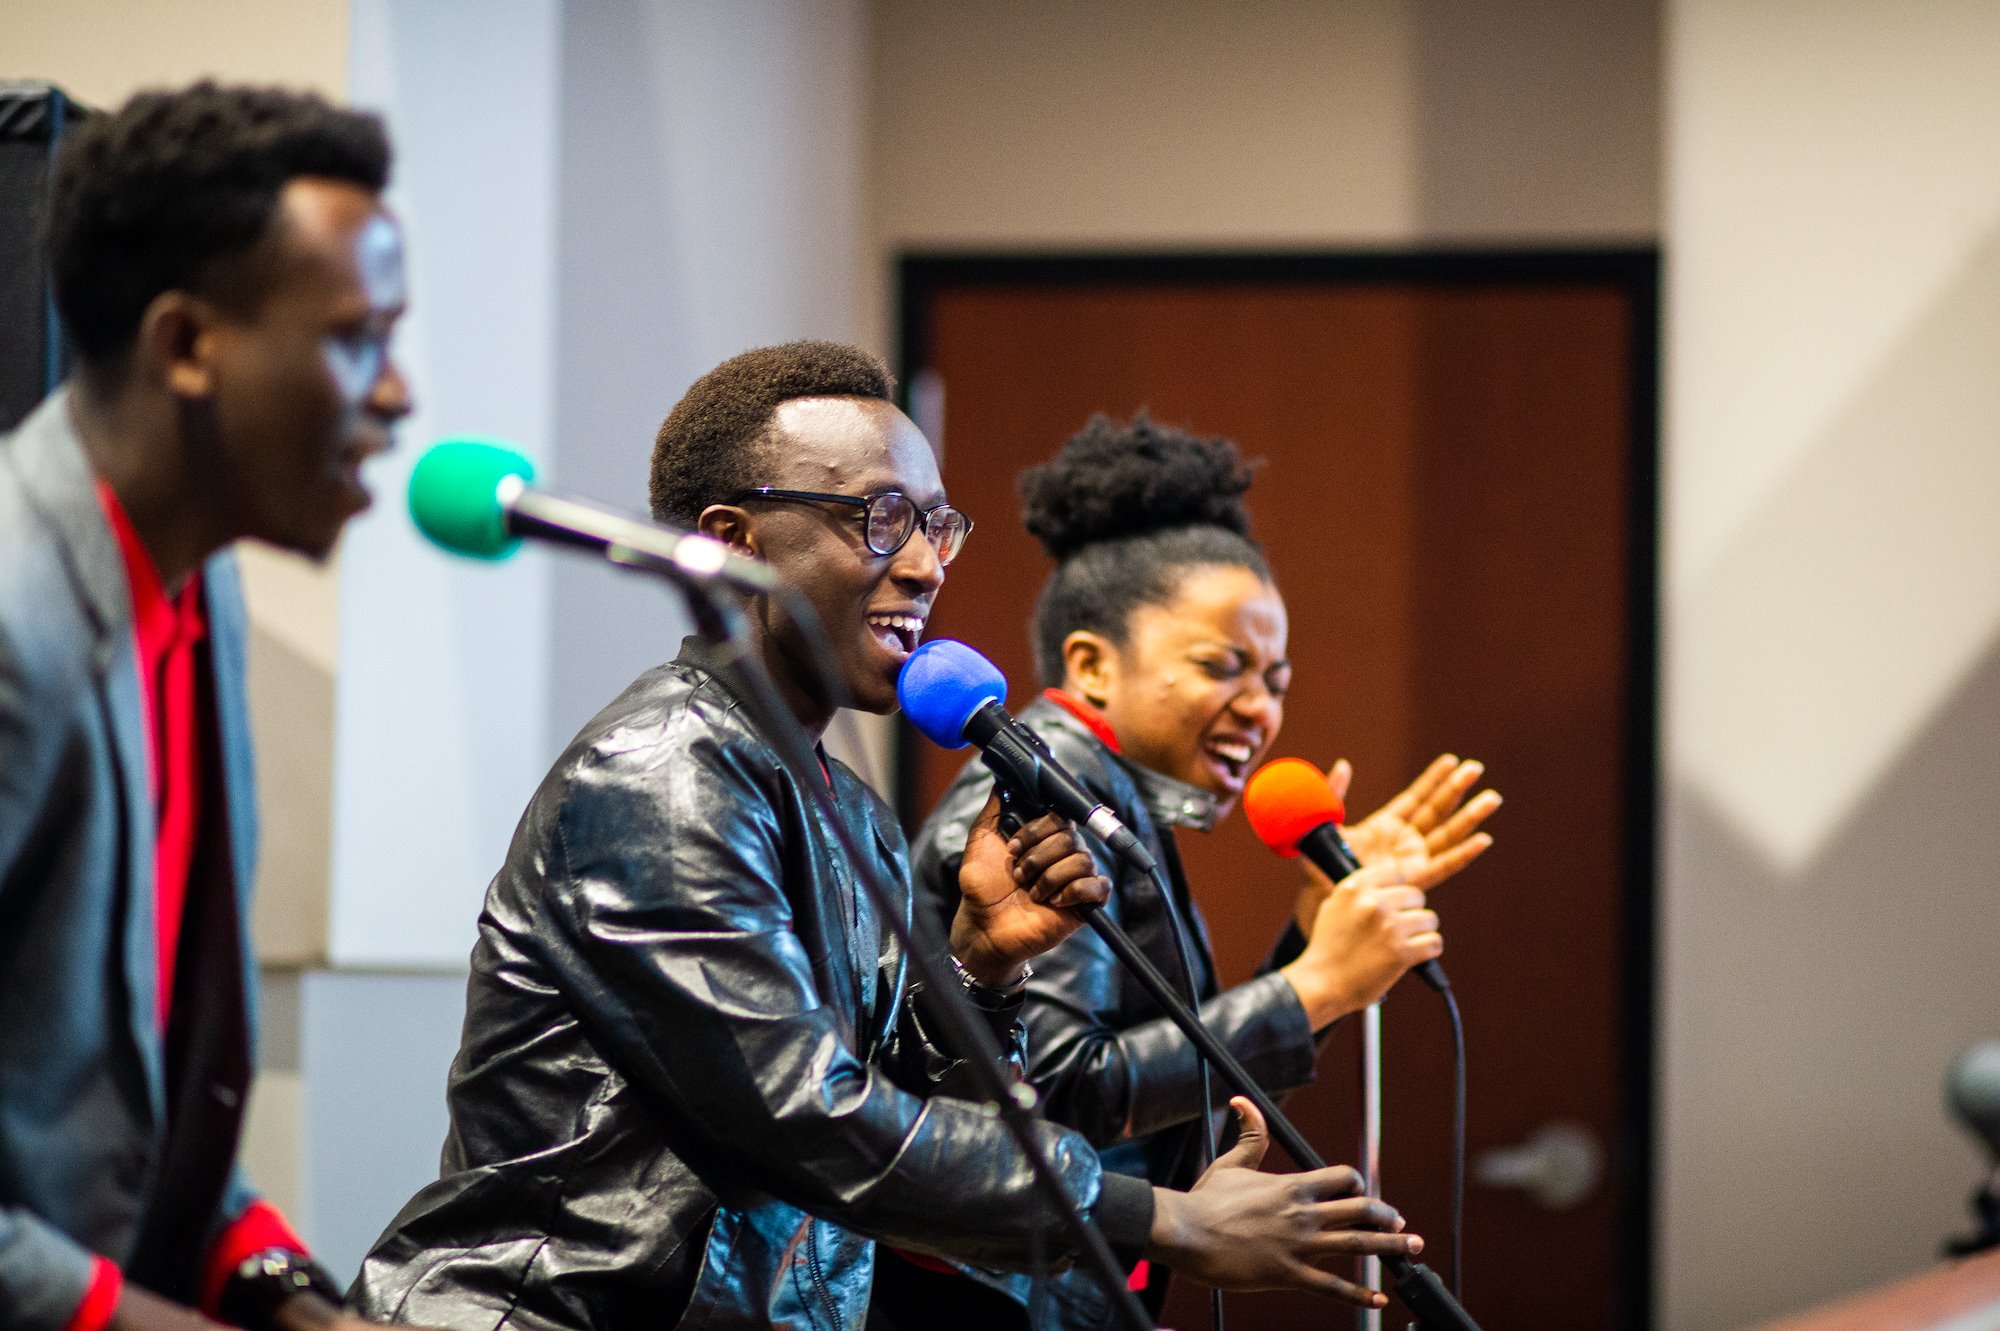 Since coming together, Live Lyve Band has performed at various university and community events, including the 2020 State of Our University address. Credit: University Communication